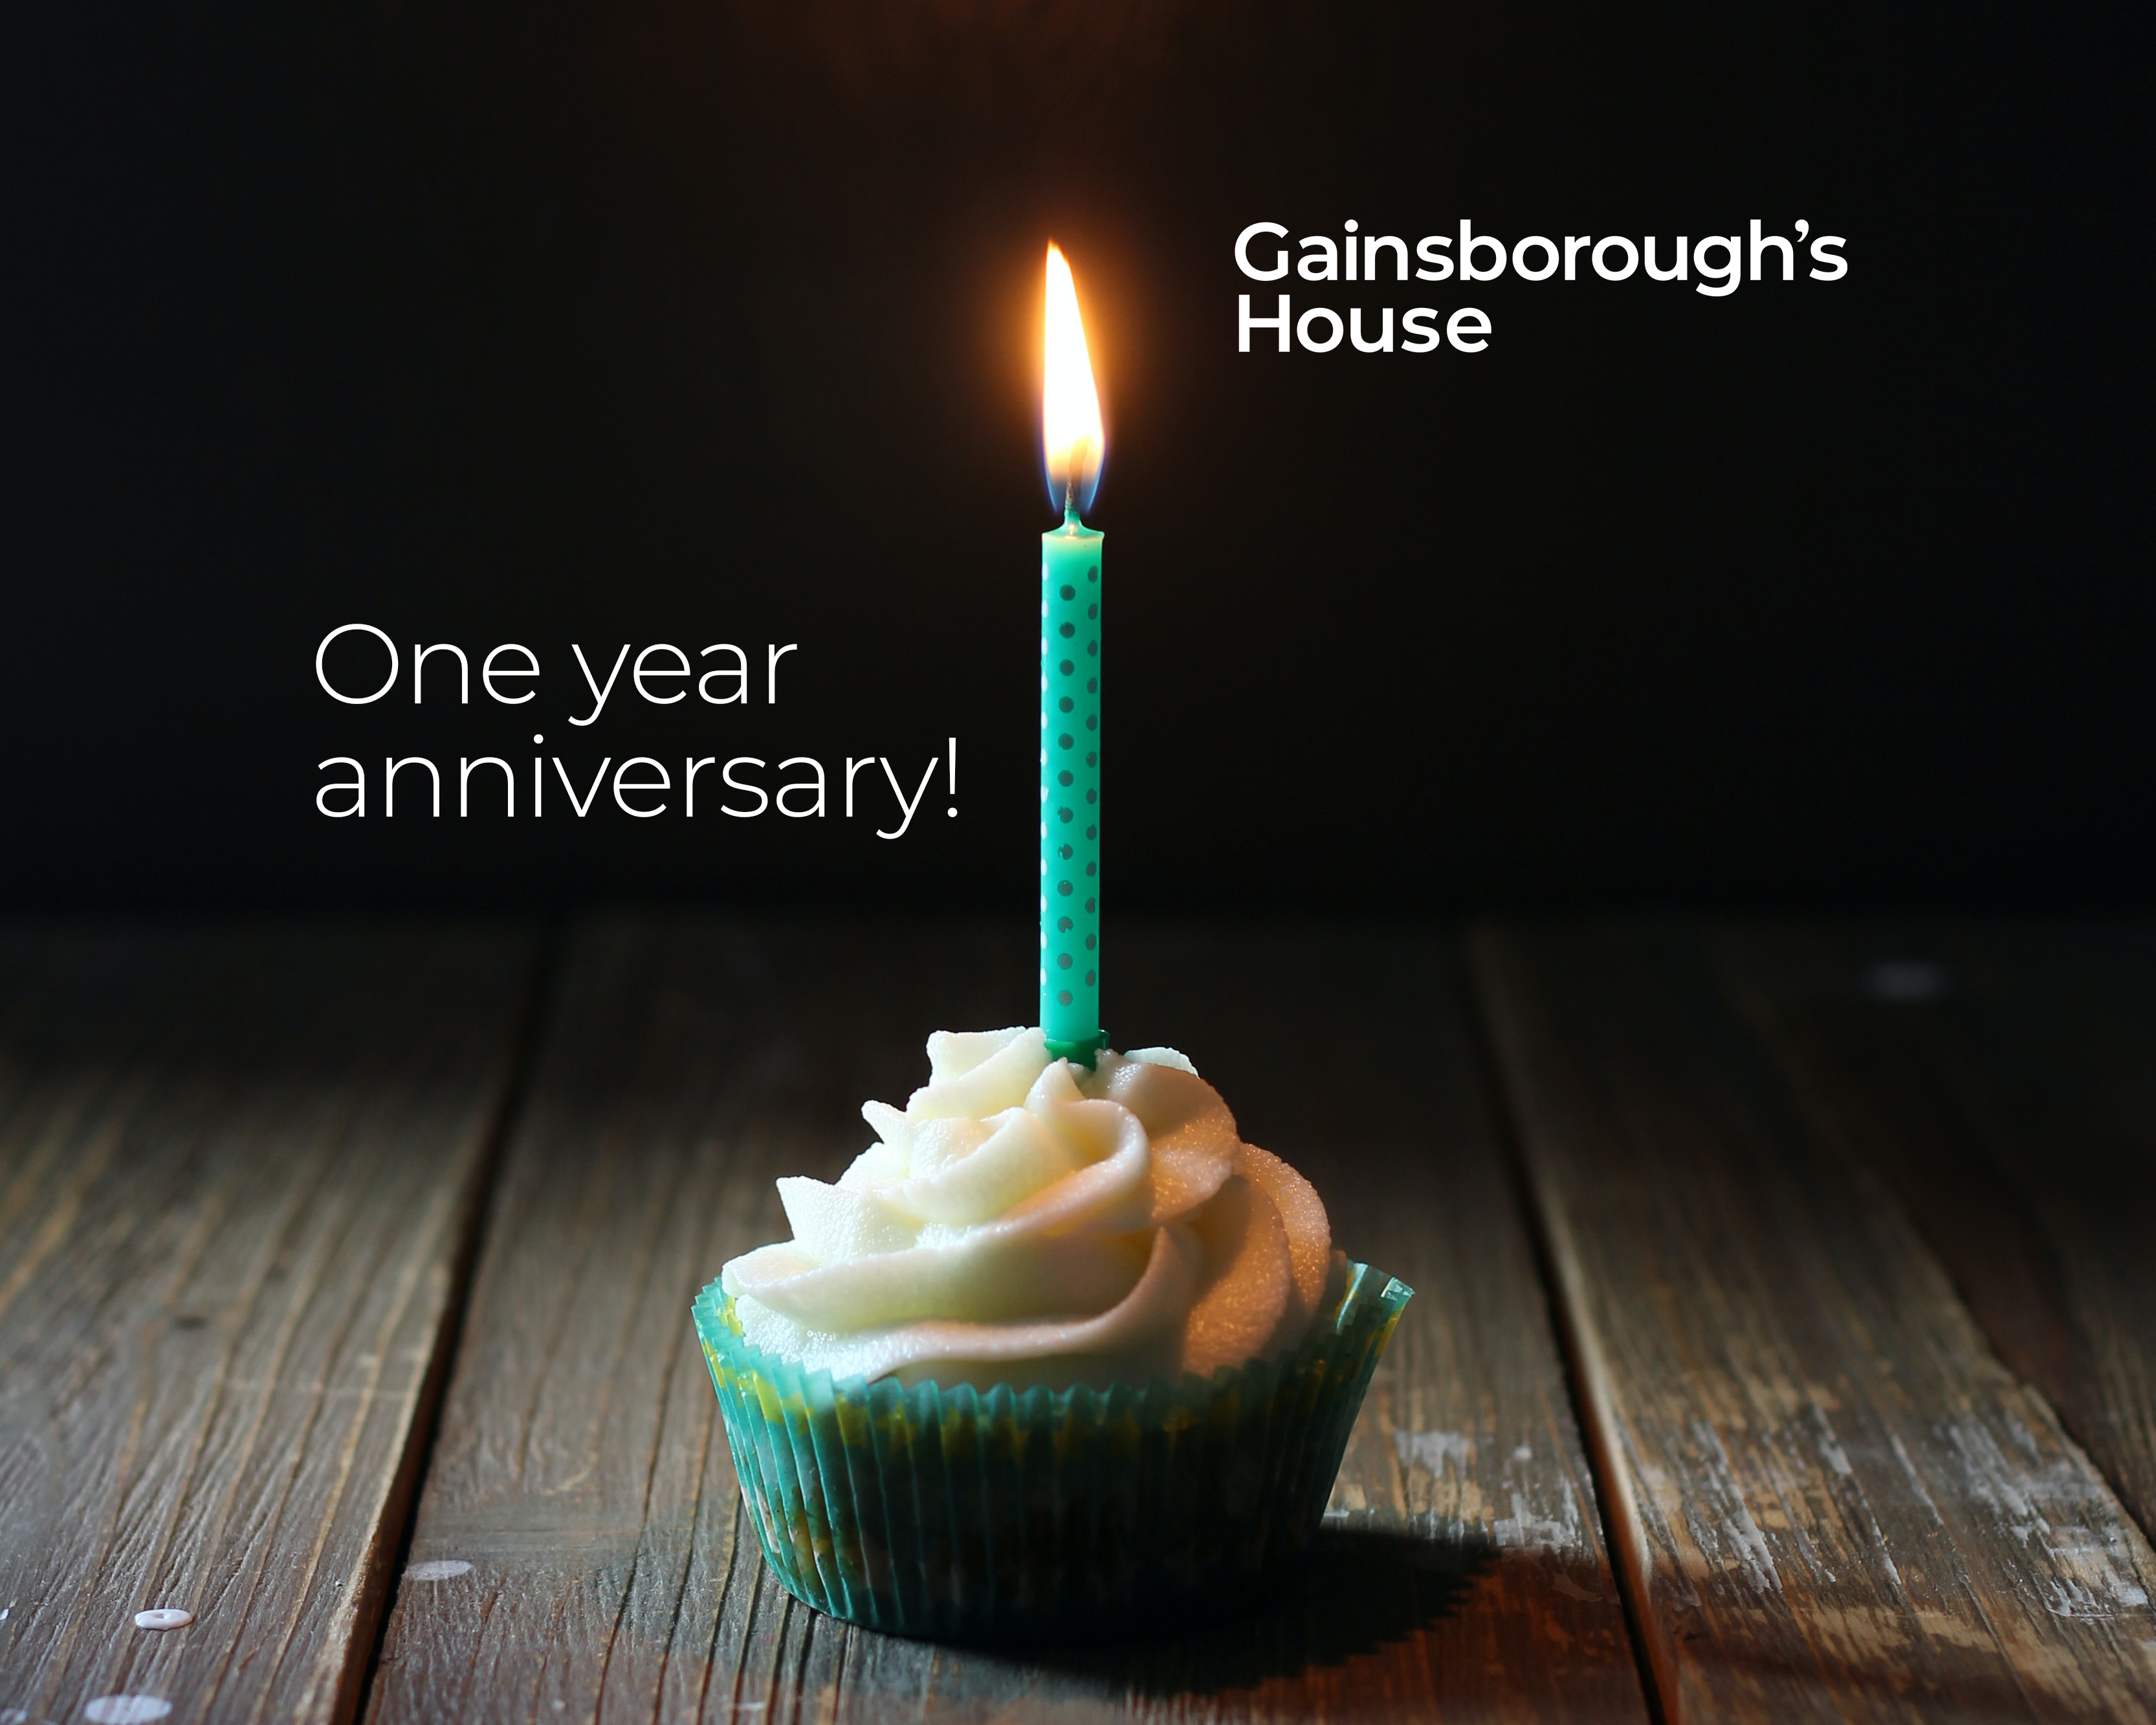 An image of a cupcake with a lit candle in it. There is overlayed text which reads: One year anniversary. The Gainsborough's House logo is in the top right corner.